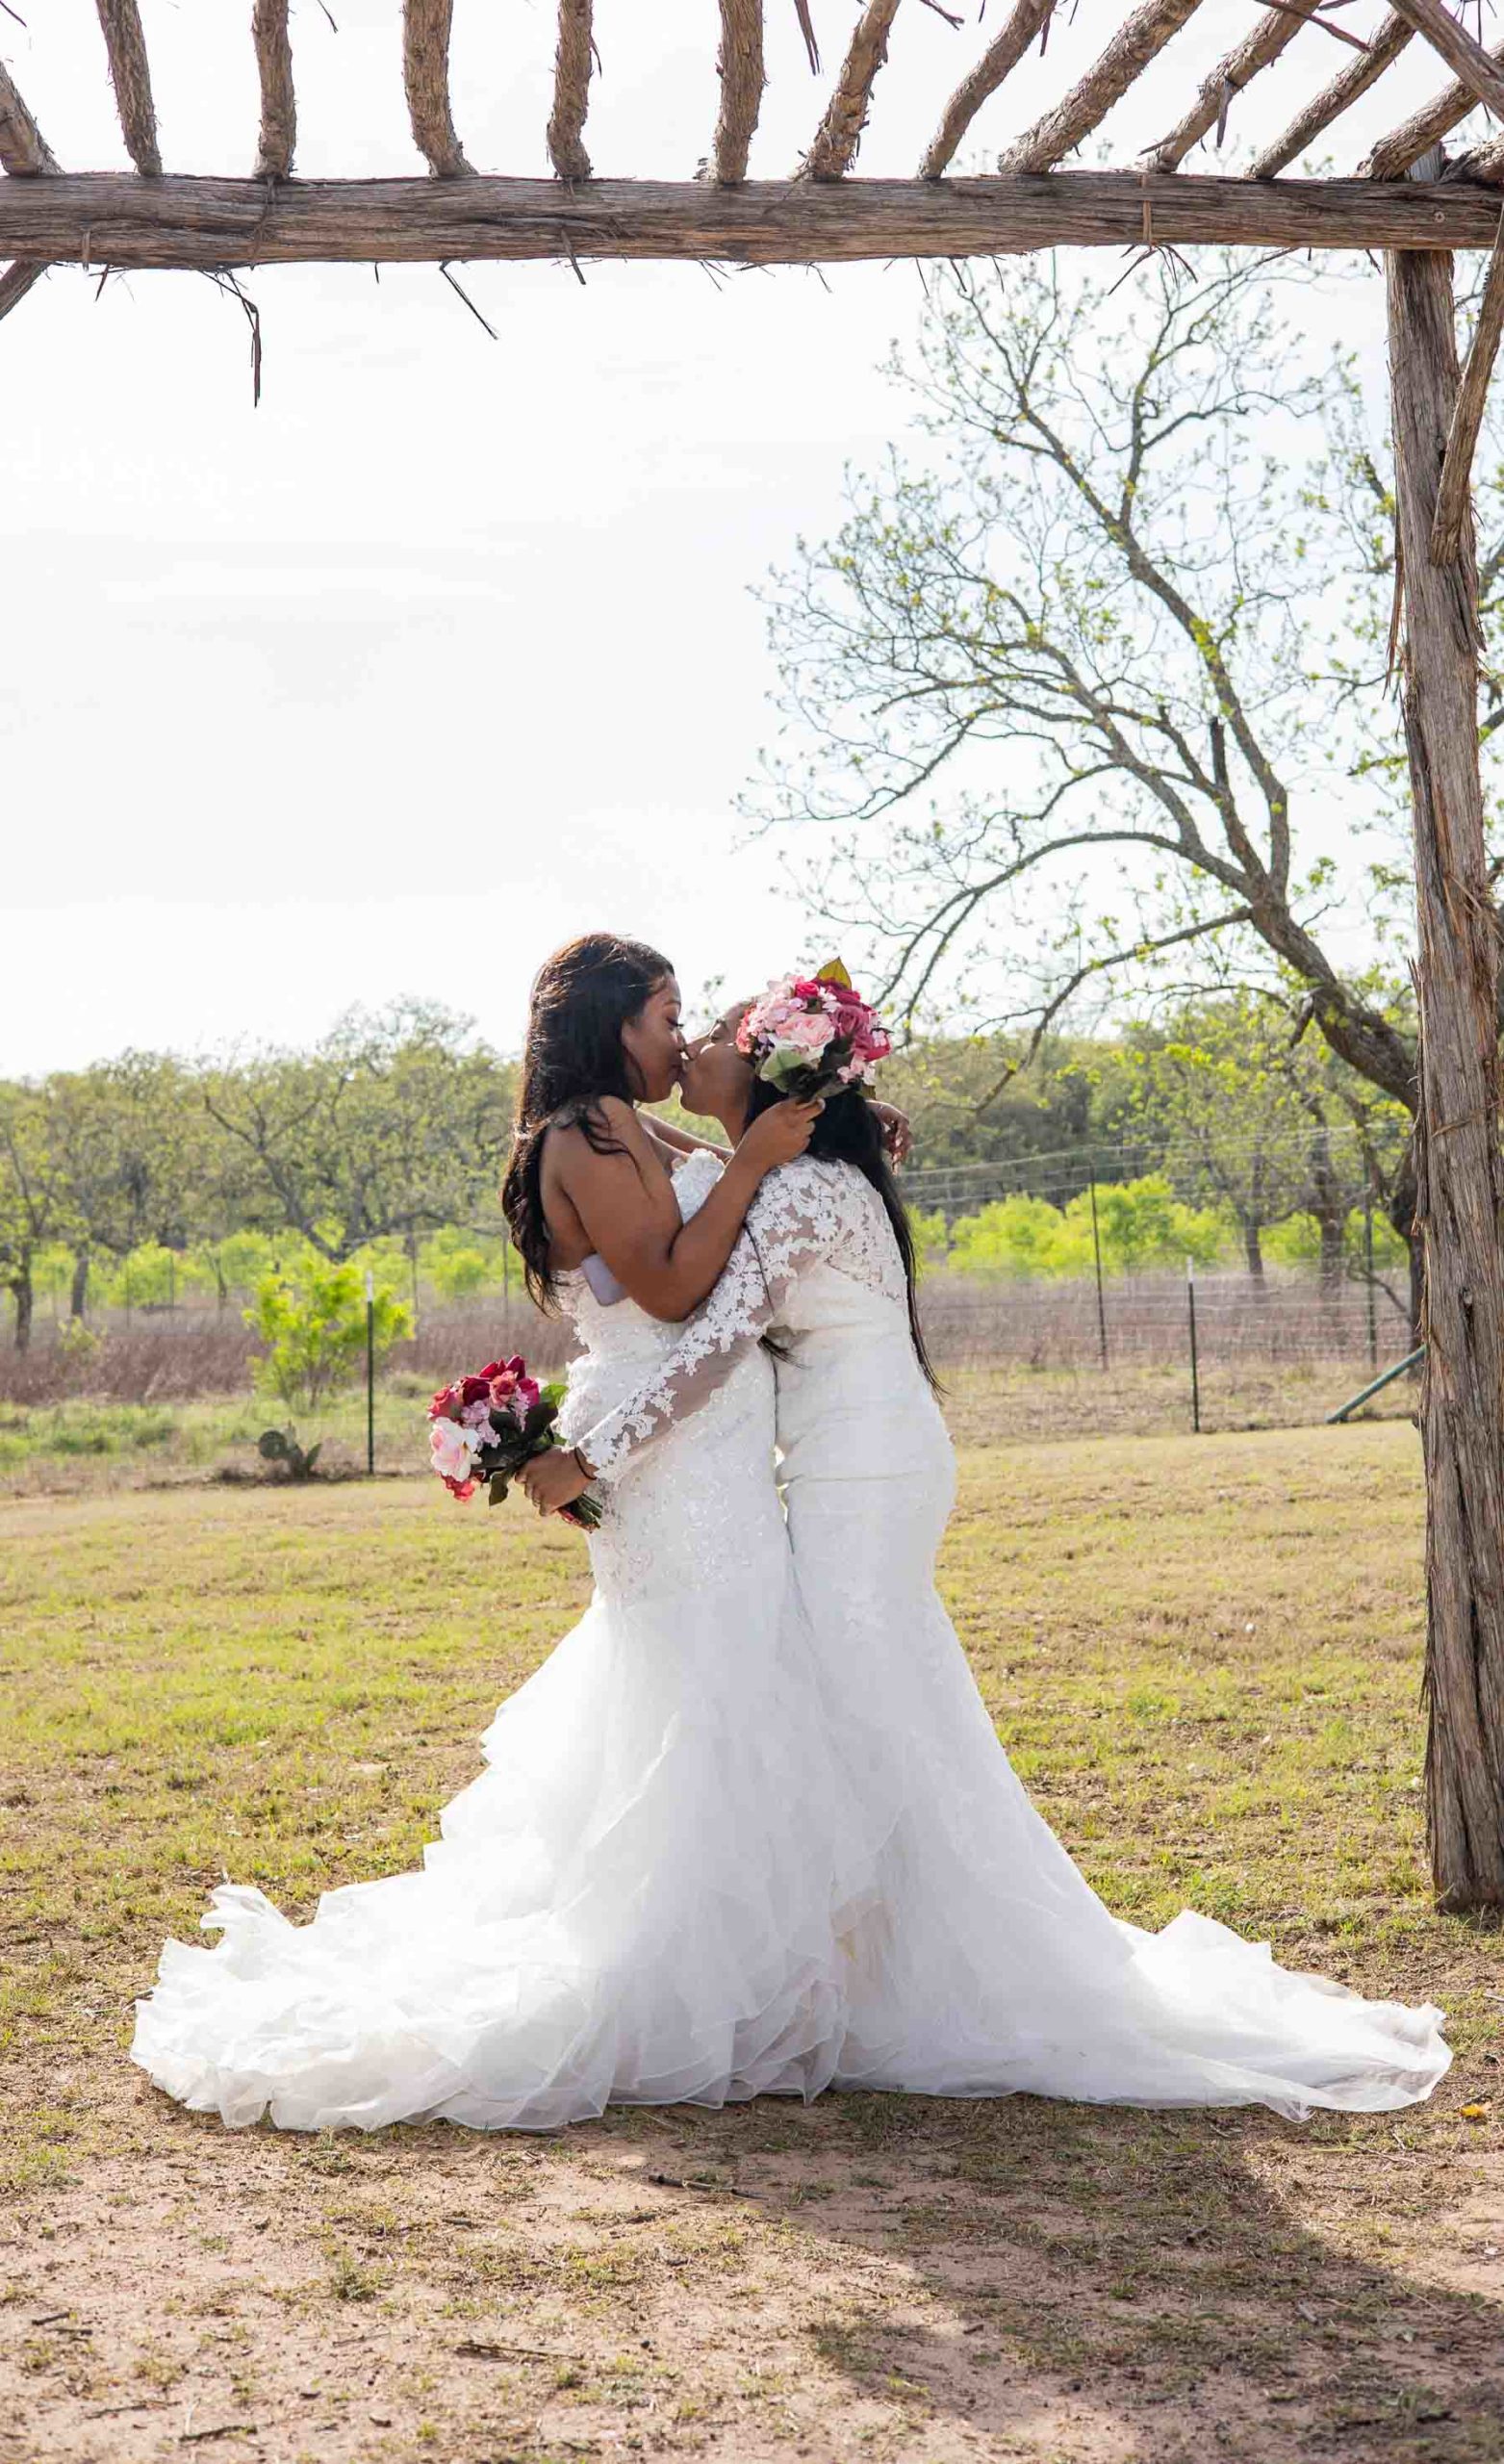 two Black lesbian brides kiss while wearing white wedding gowns and holding pink flower bouquets under wooden arch